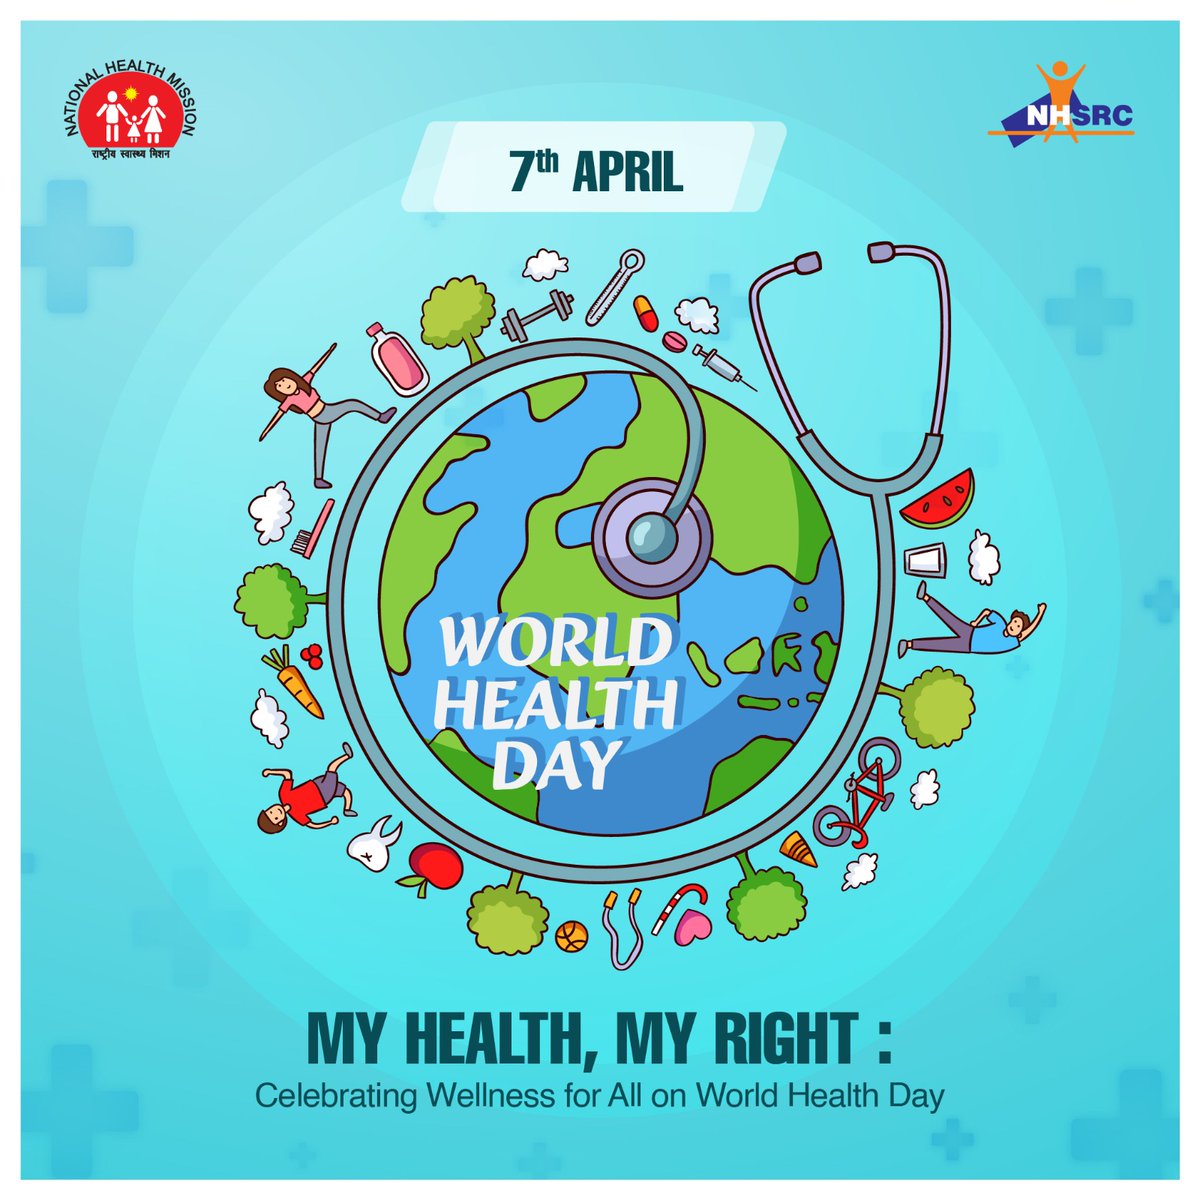 On this #WorldHealthDay, let's each play a part in building a healthier world and encouraging the development of communities dedicated to promoting well-being. #HealthForAll